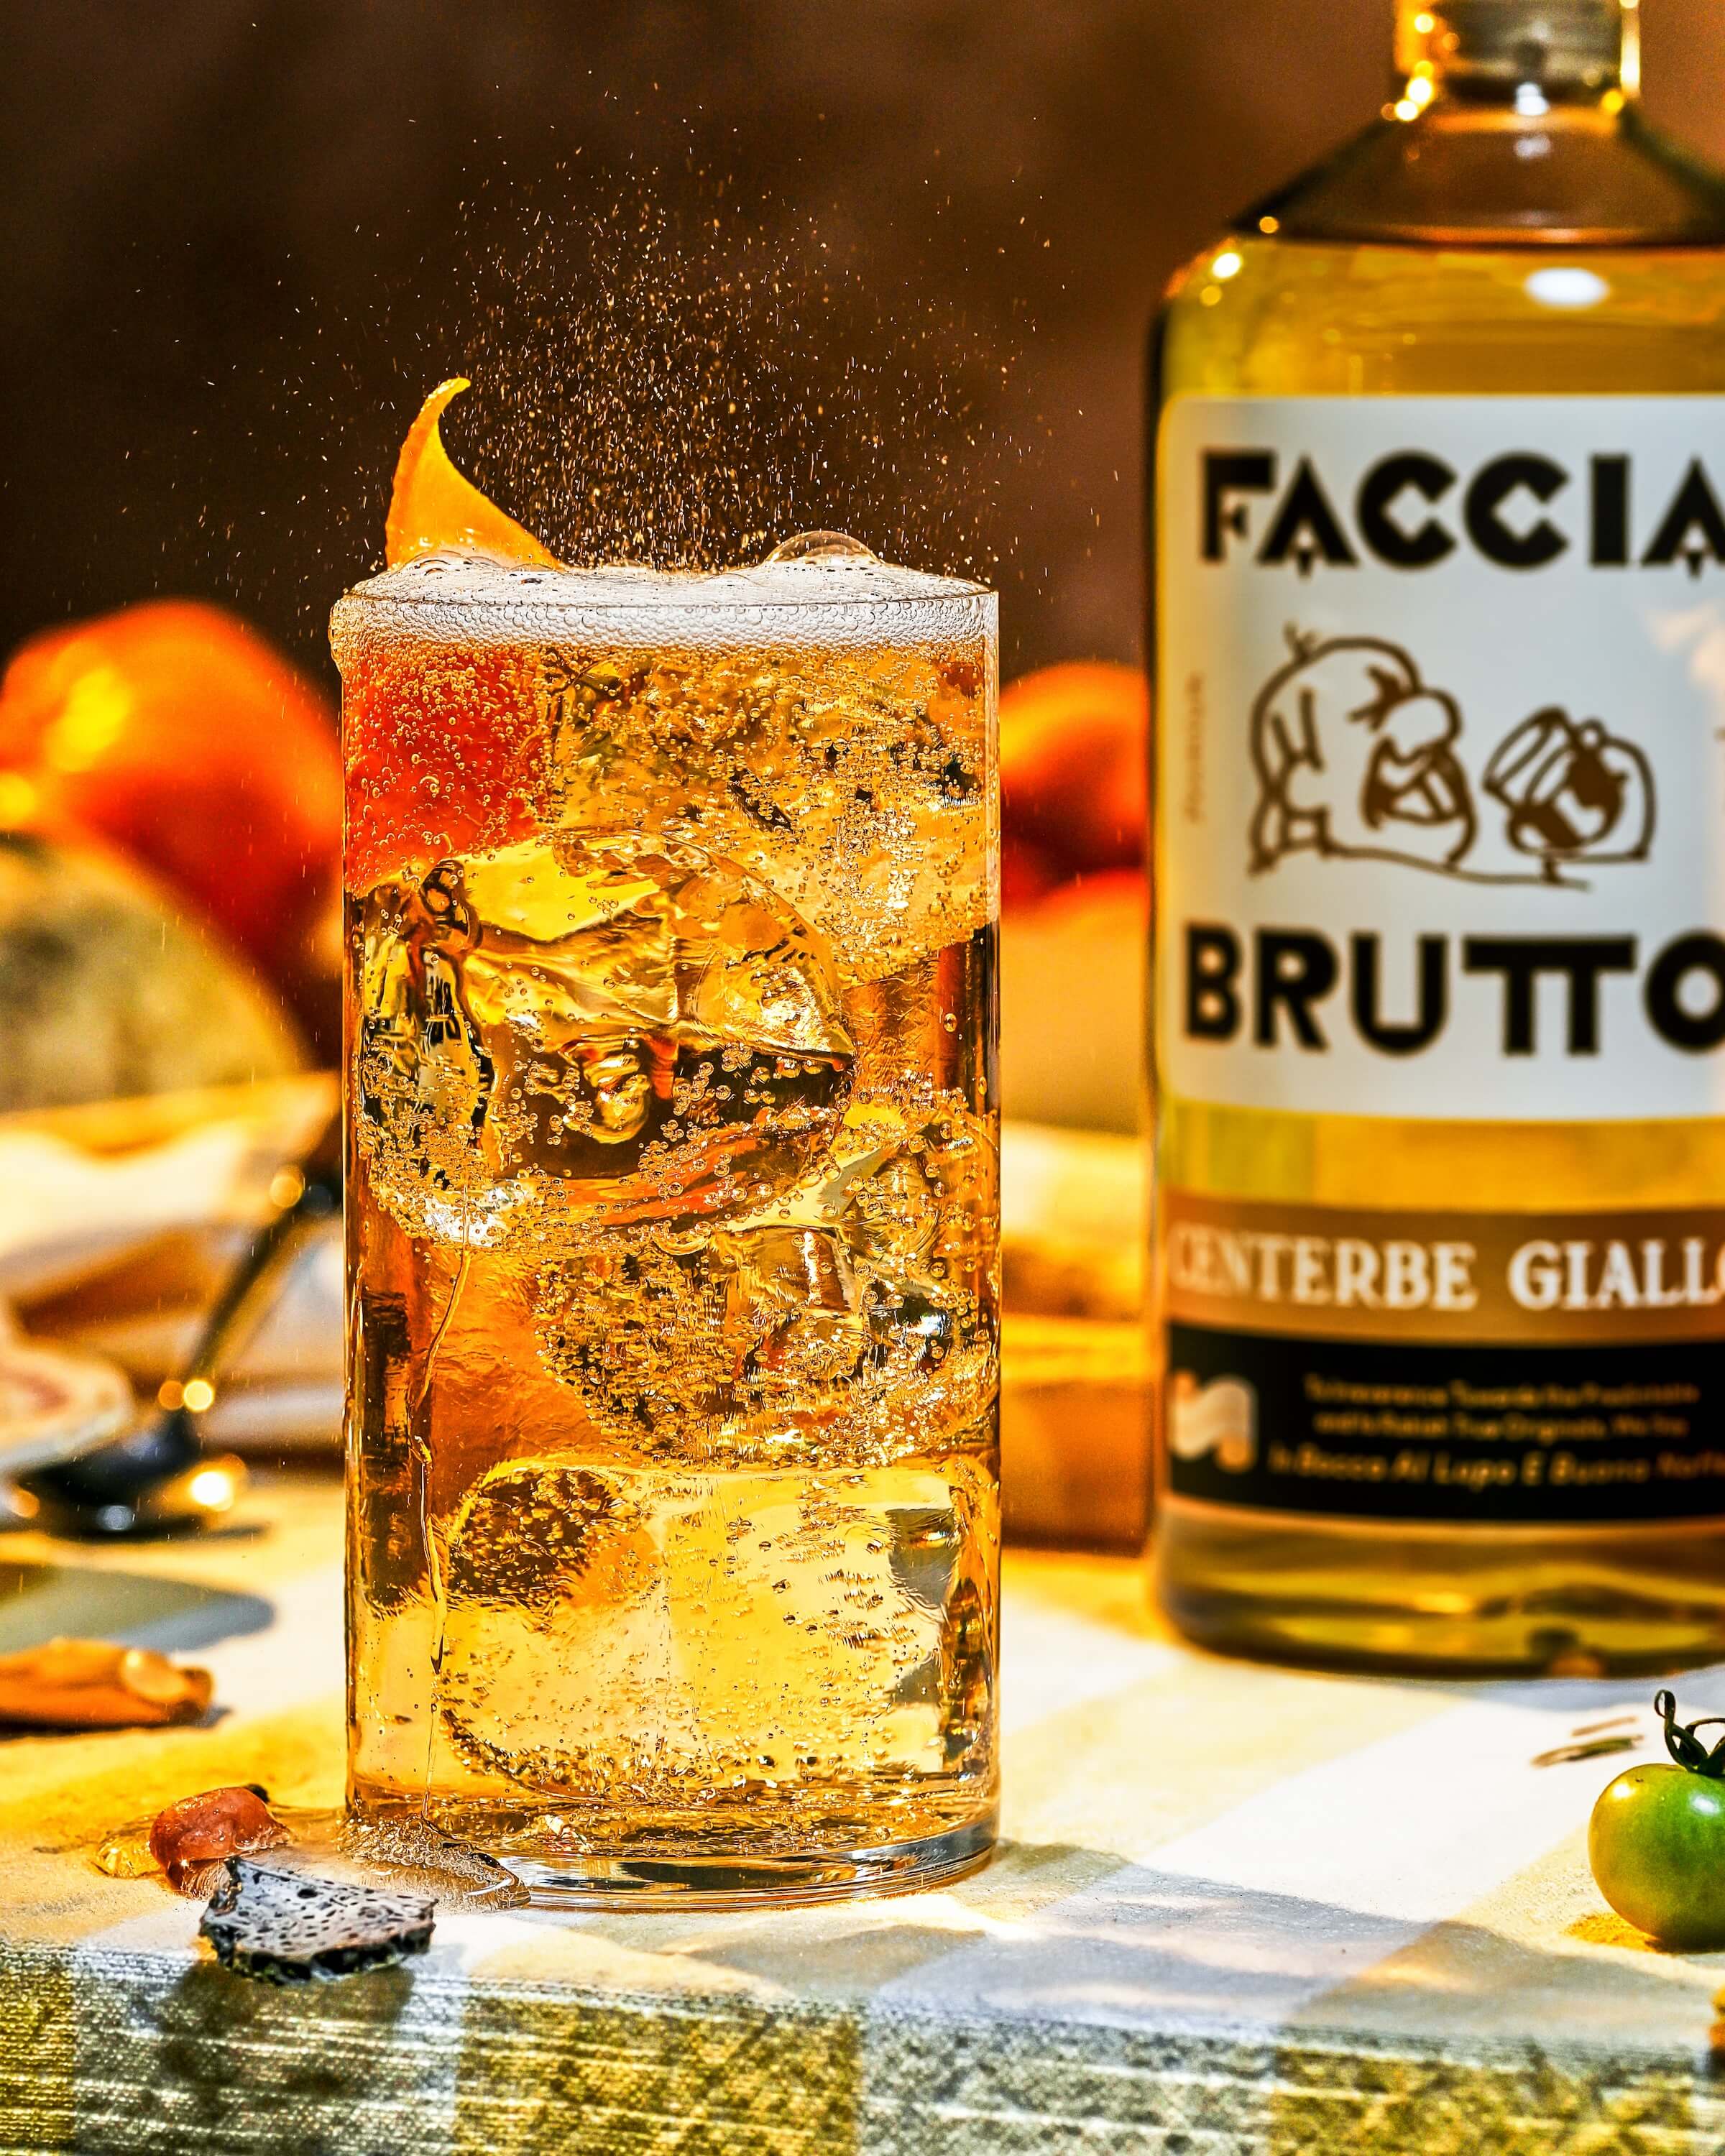 Glass with ice and fizz with Faccia Brutto Centerbe Giallo bottle in background